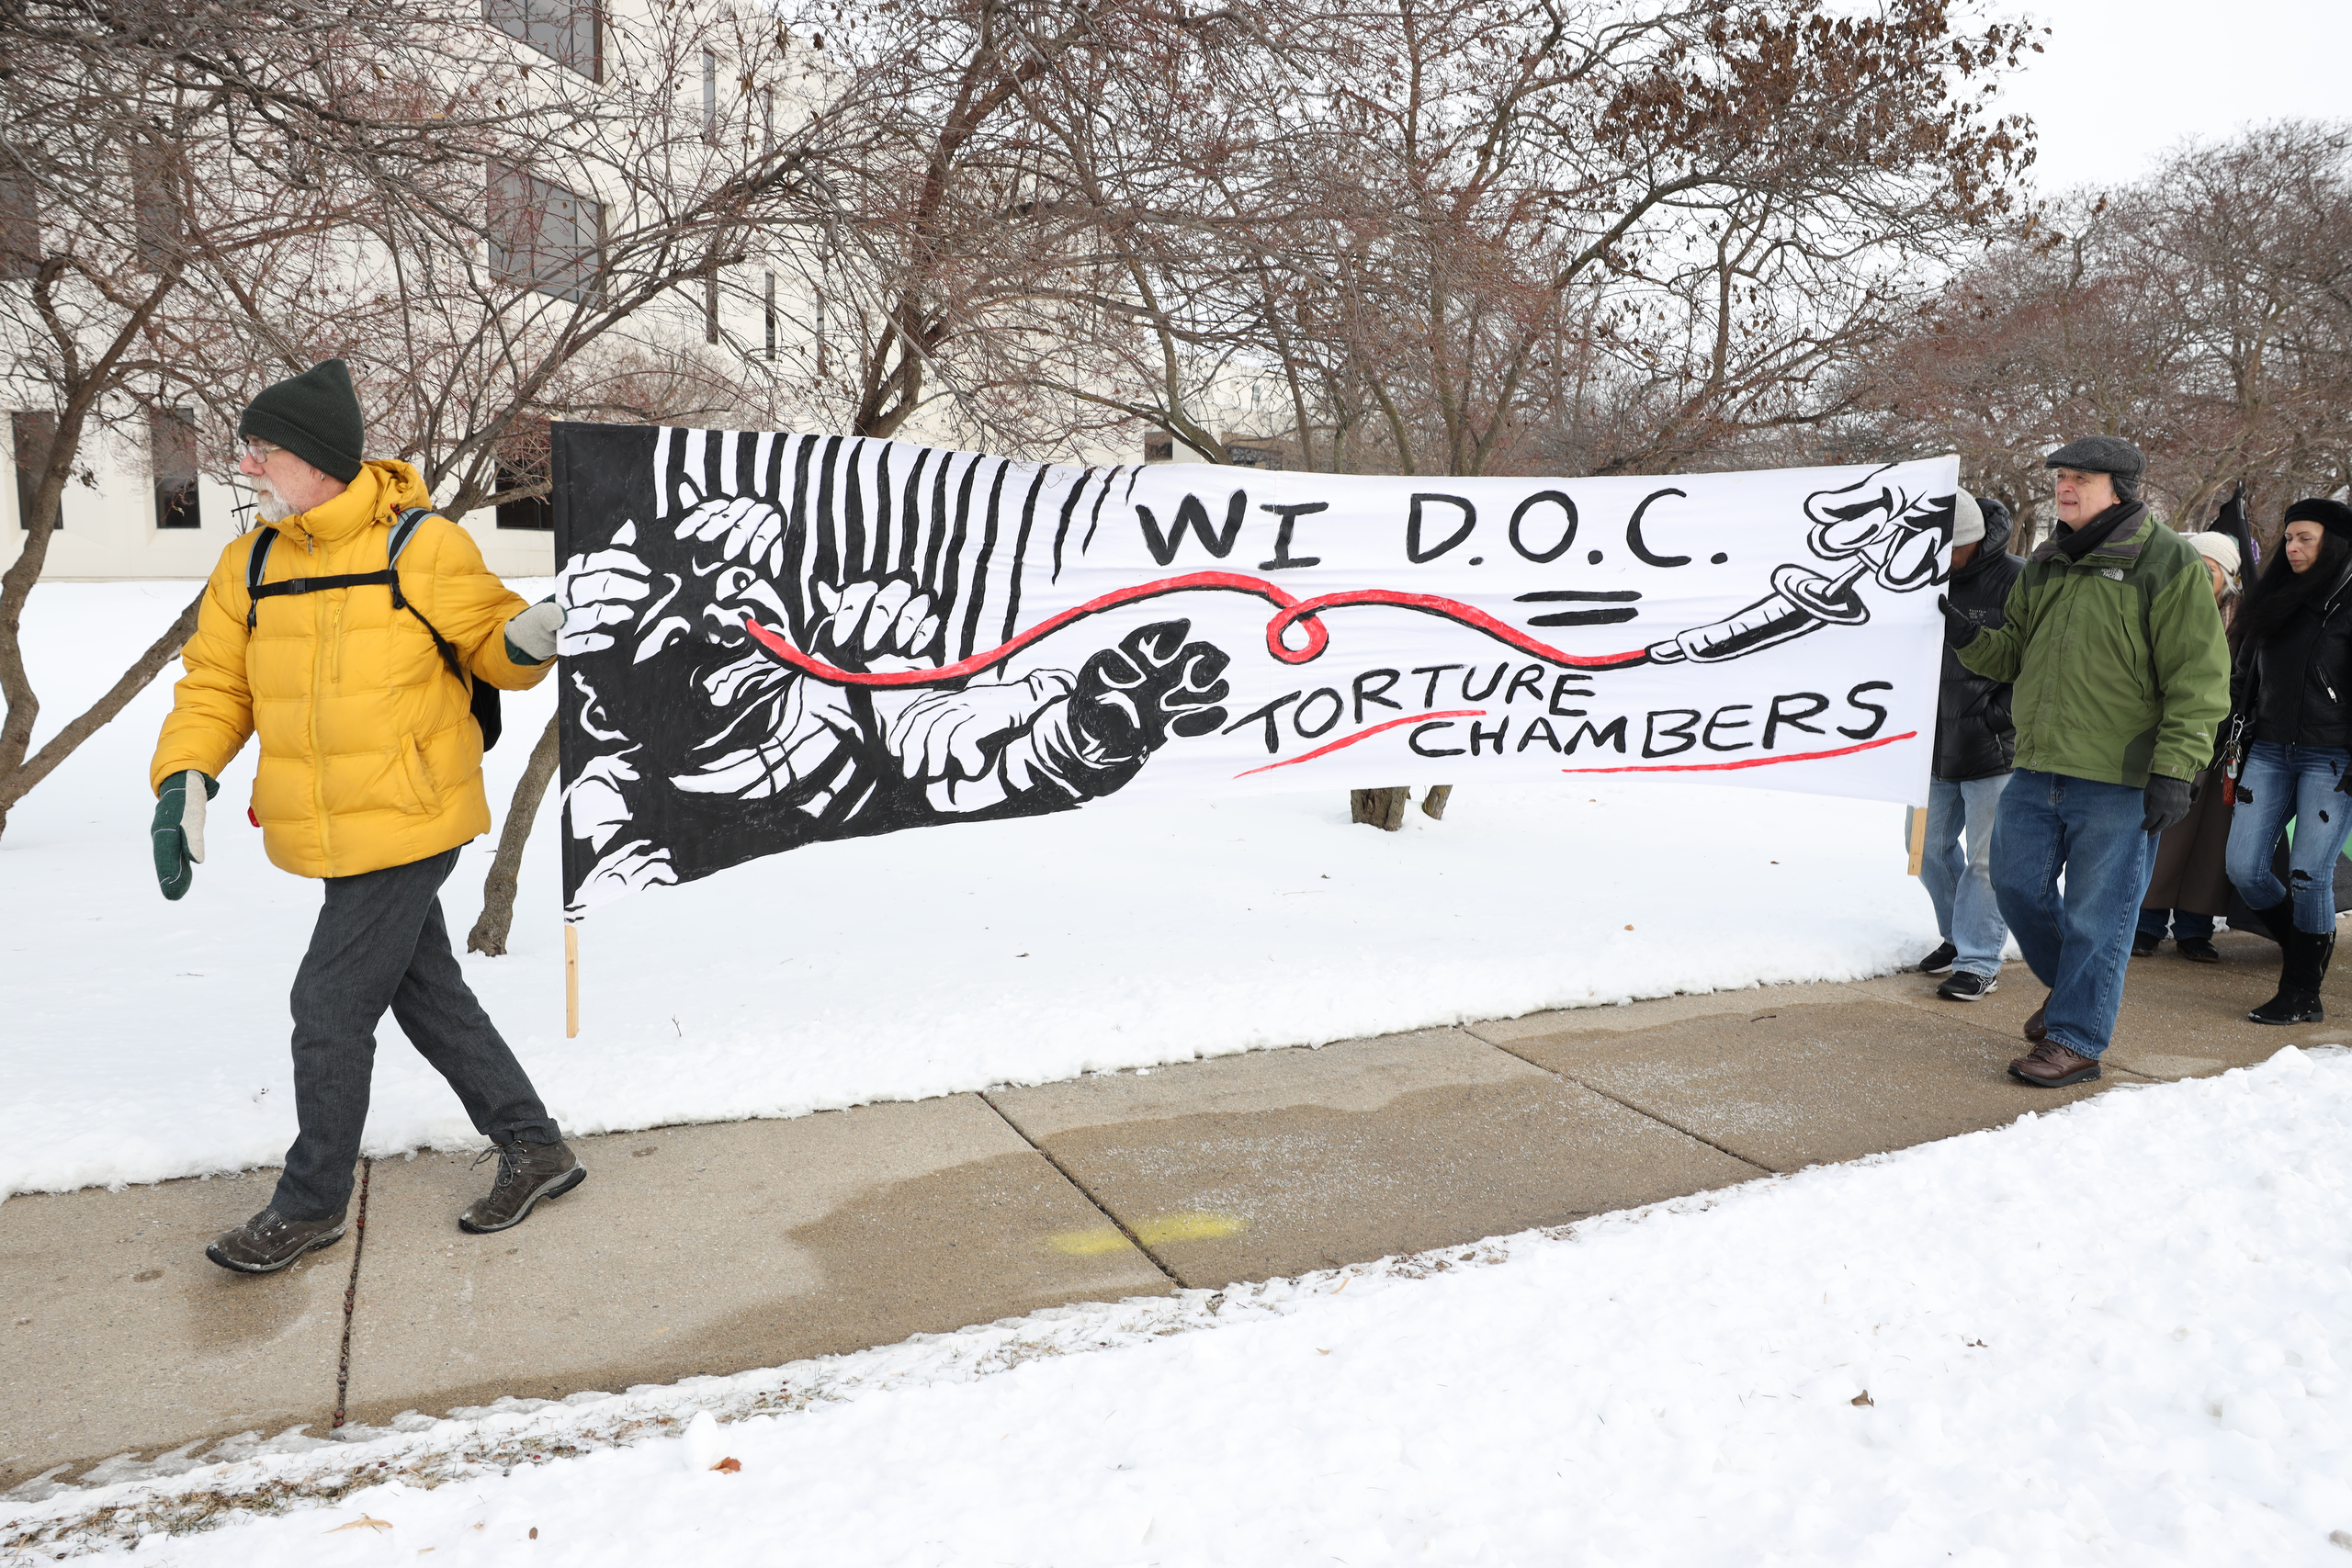 Prisoner-rights group Moses, participate in a rally near the state Department of Corrections